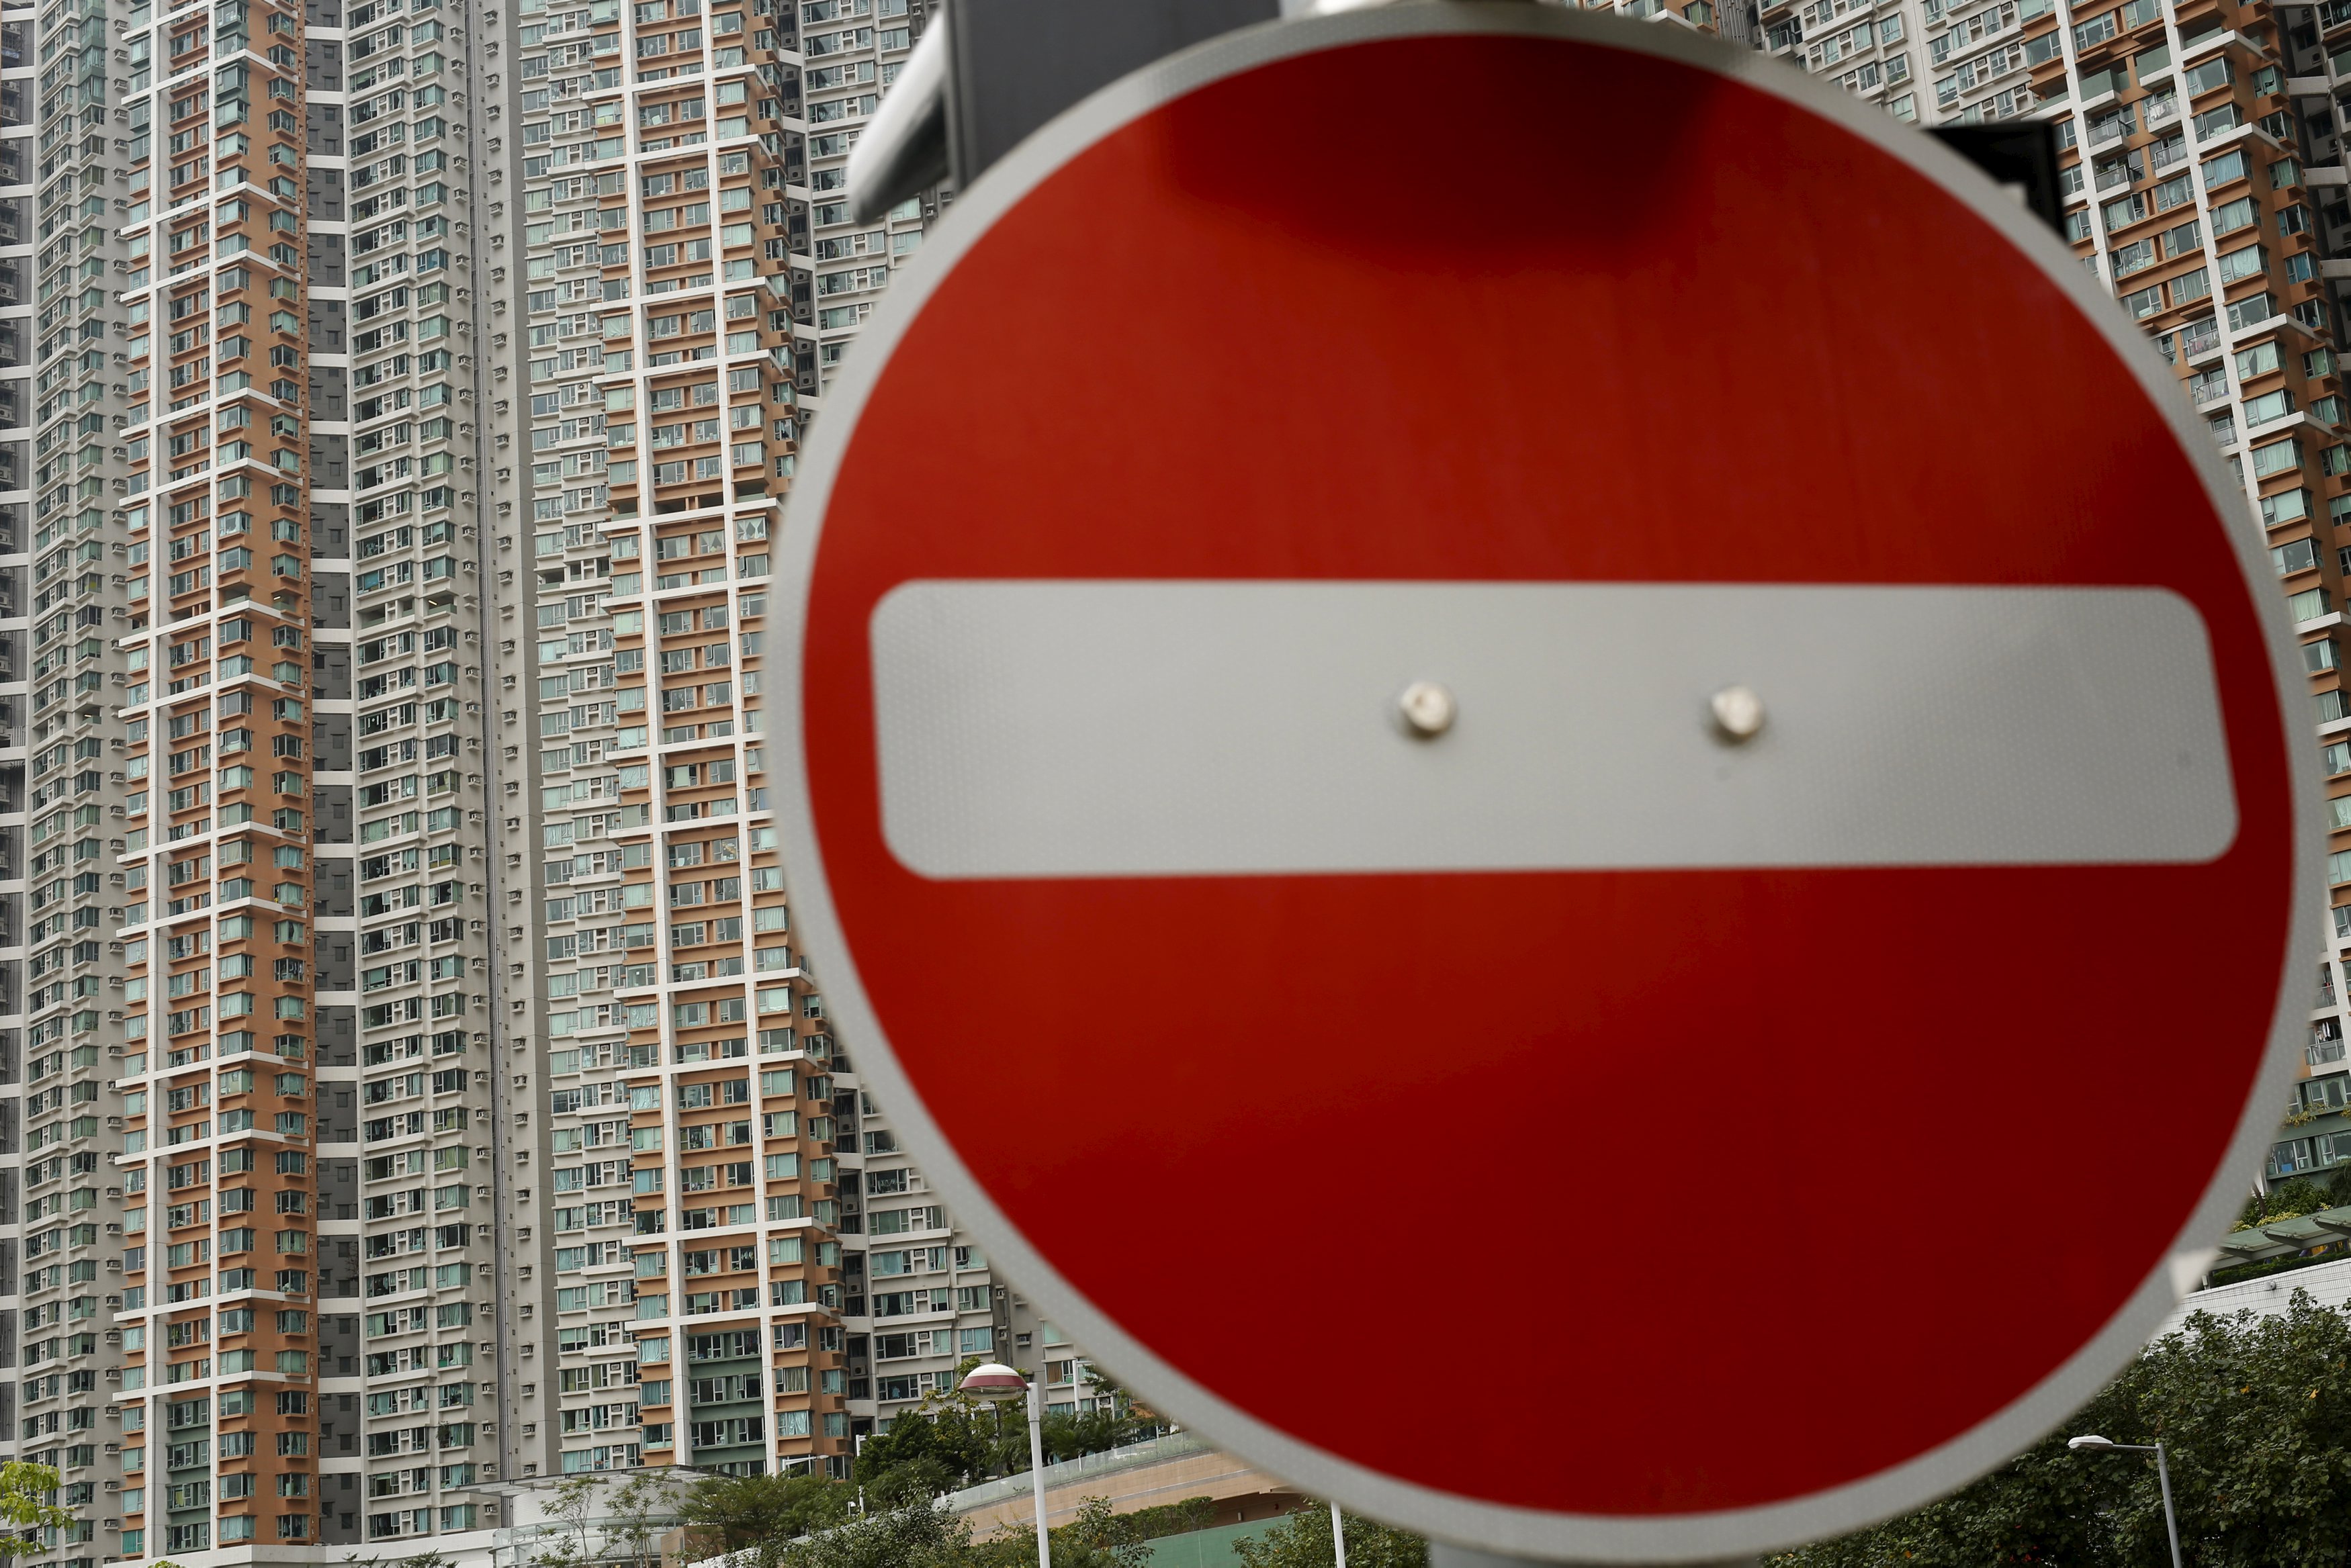 Private housing blocks are seen behind a traffic sign in Hong Kong, China December 15, 2015. Hong Kong is bracing for greater economic challenges as the prospect of a new cycle of interest rate rises drives fears of capital outflows that could put further pressure on the Asian financial hub. Hong Kong's property market, which has seen prices more than double since 2008, had already slowed in anticipation of a local rate hike, and analysts say a further slowdown will depend on China, which is facing its weakest growth in 25 years. Picture taken December 15. REUTERS/Tyrone Siu